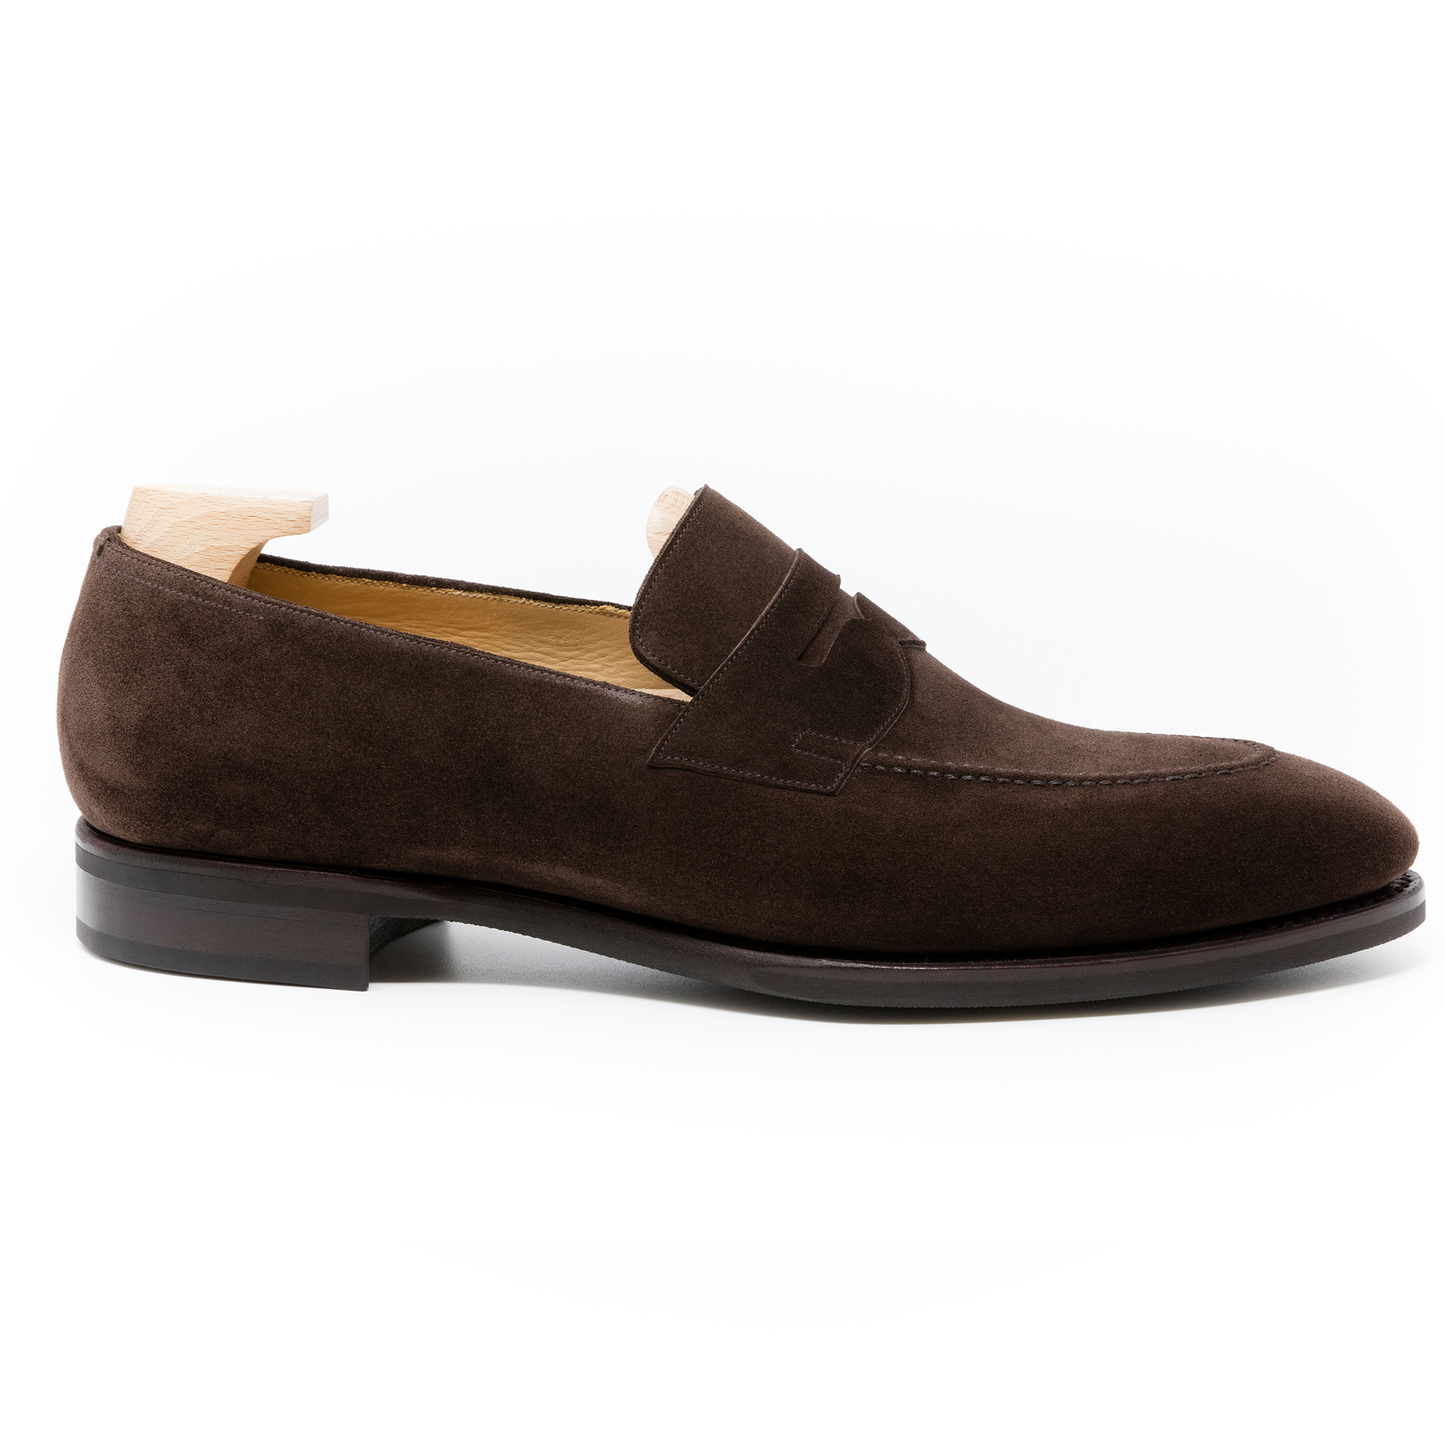 TLB Mallorca  Leather Men's Loafers made in Spain